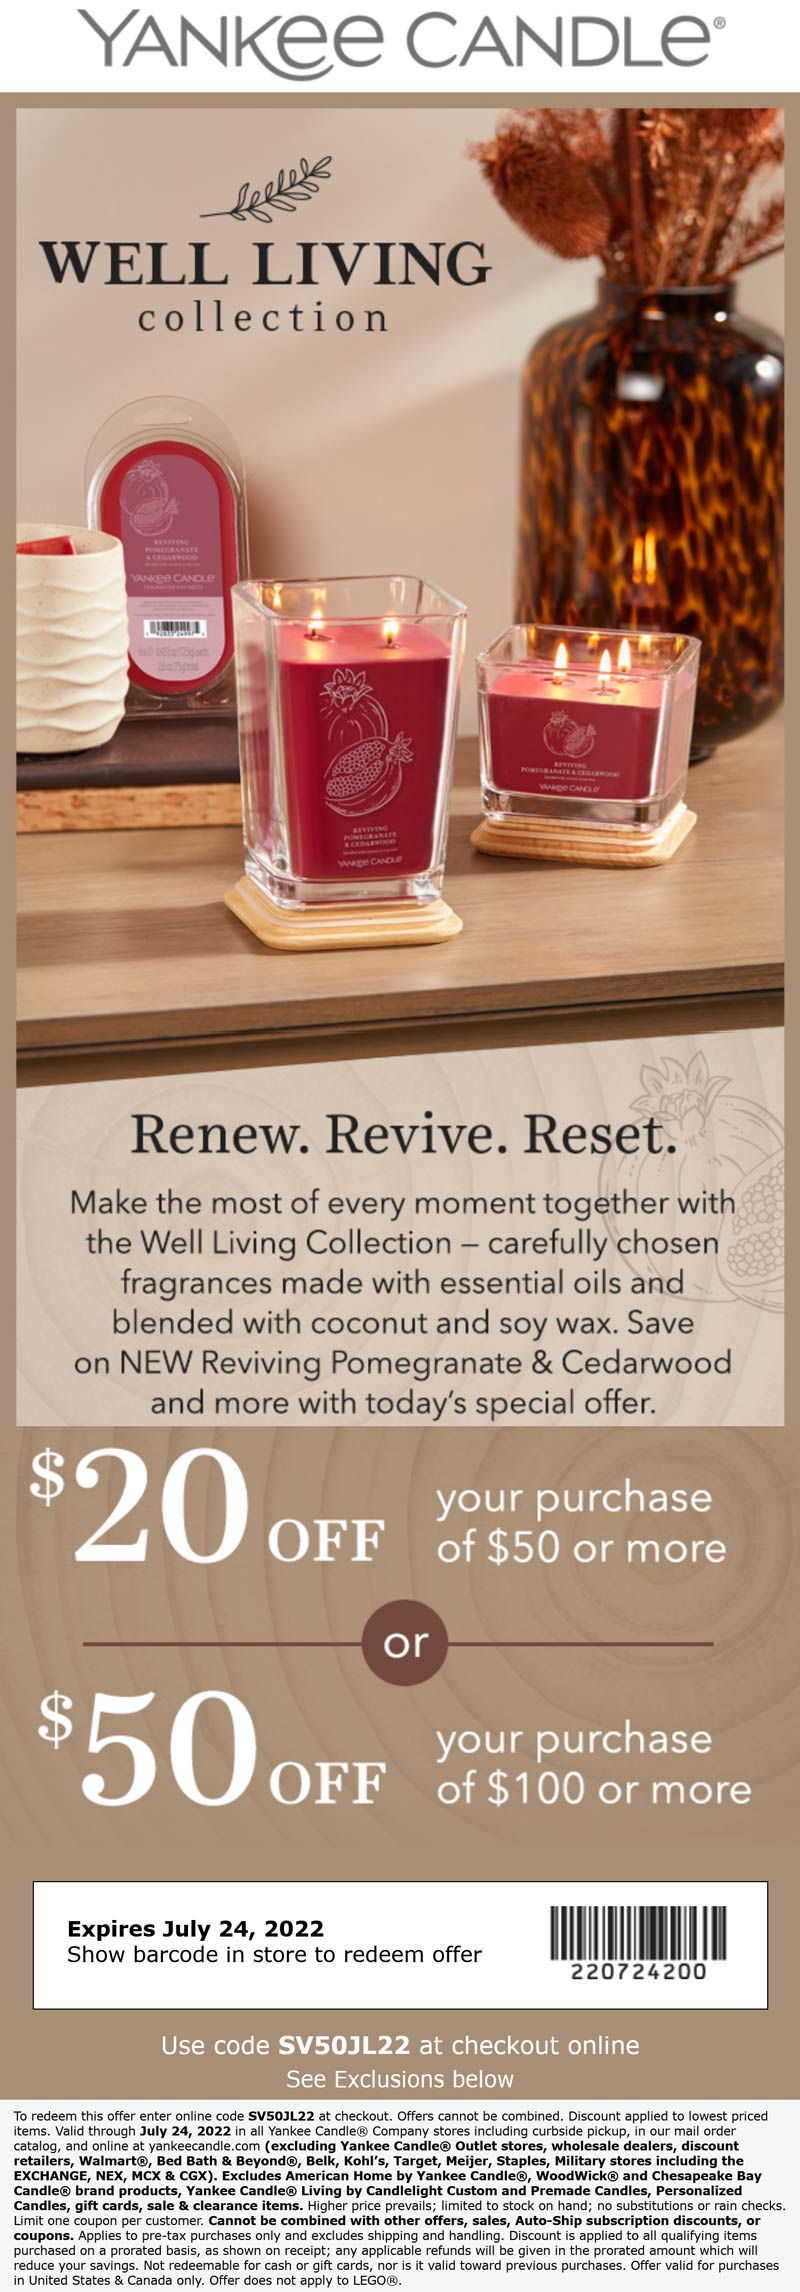 Yankee Candle stores Coupon  $20-$50 off $50+ at Yankee Candle, or online via promo code SV50JL22 #yankeecandle 